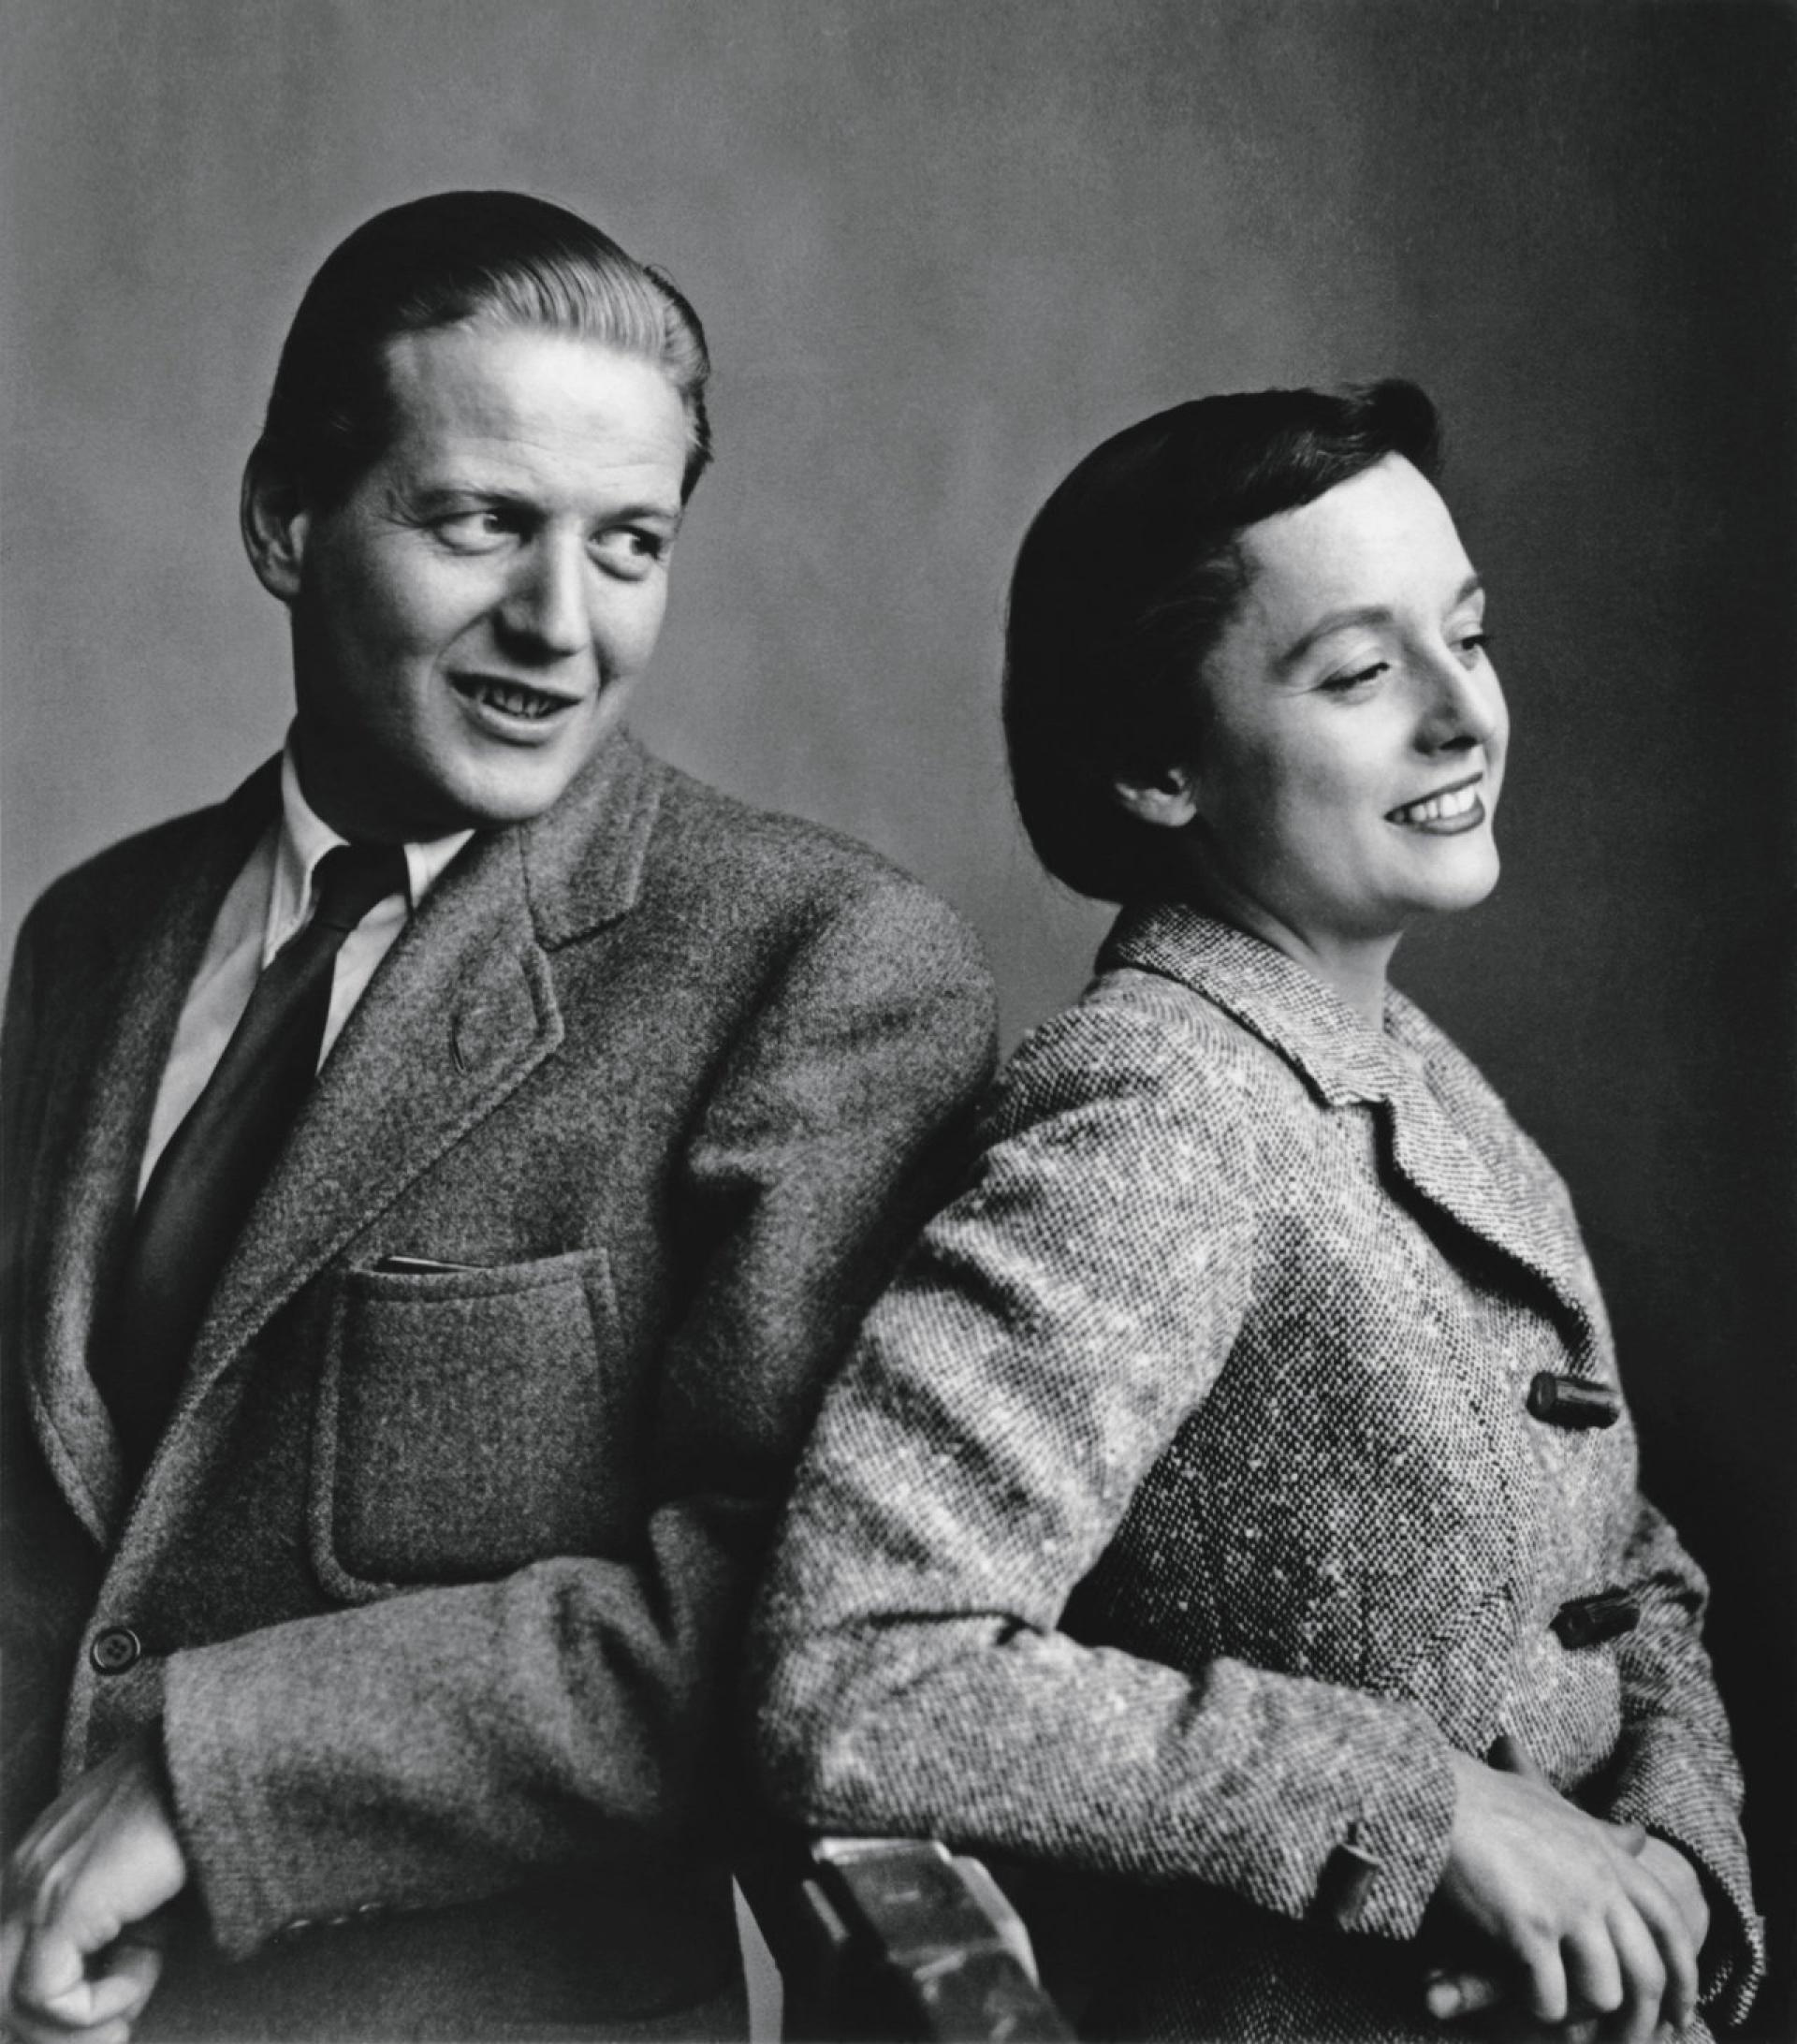 Hans and Florence Knoll around 1945. | All images © Knoll Archive